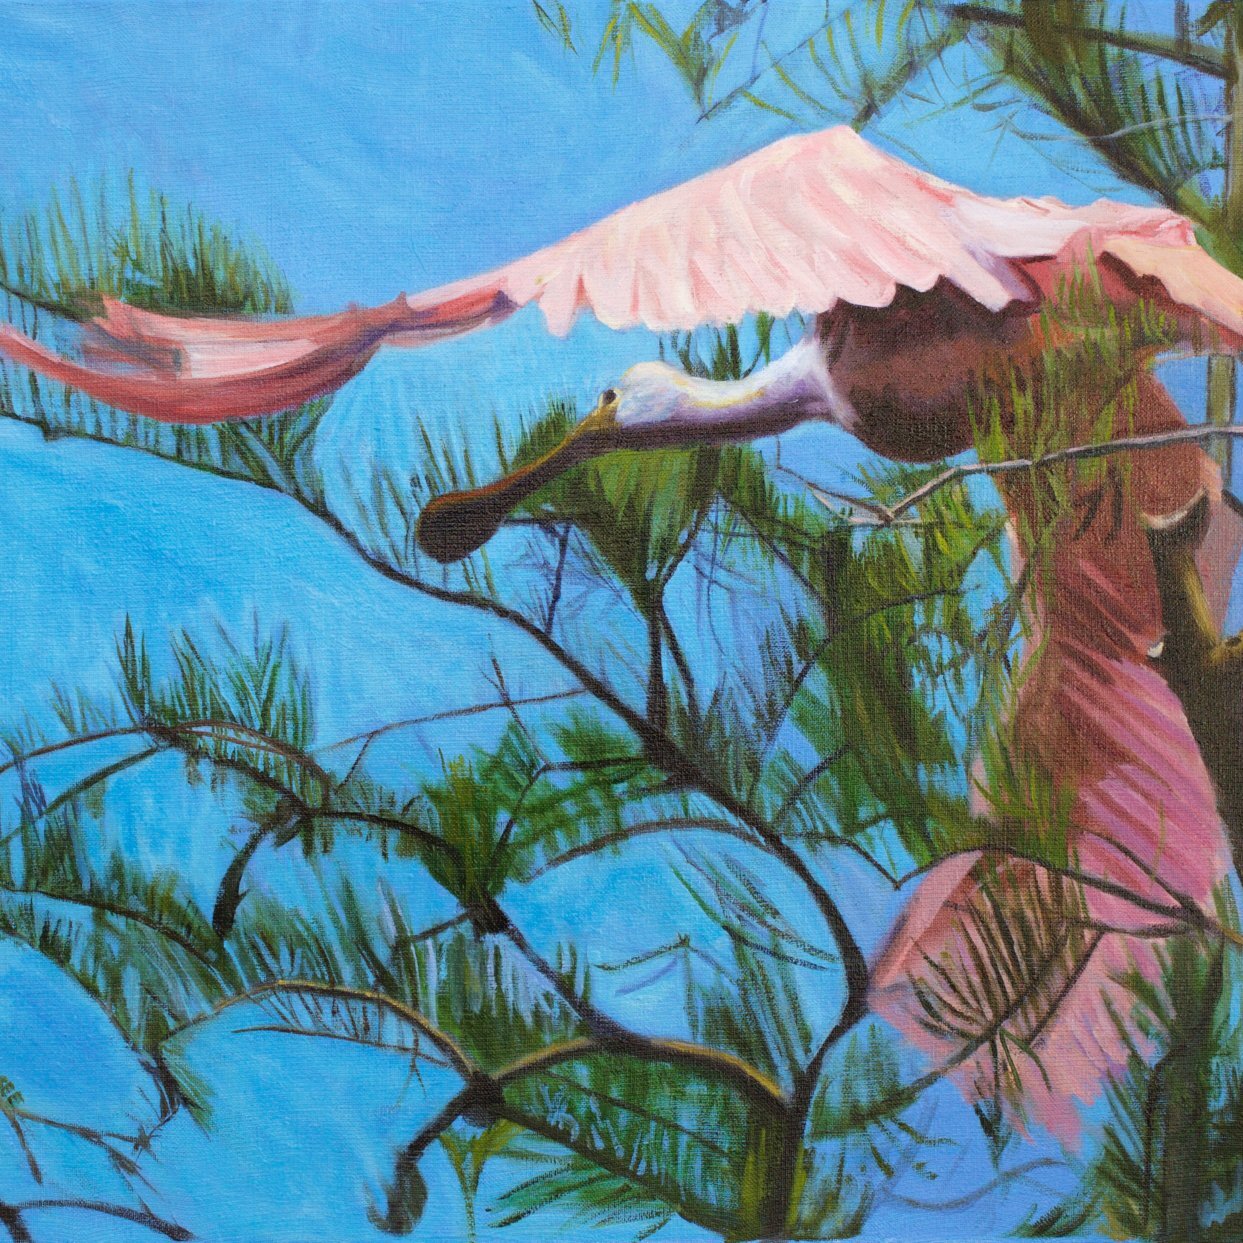 Beautiful oil painting of a bird flying